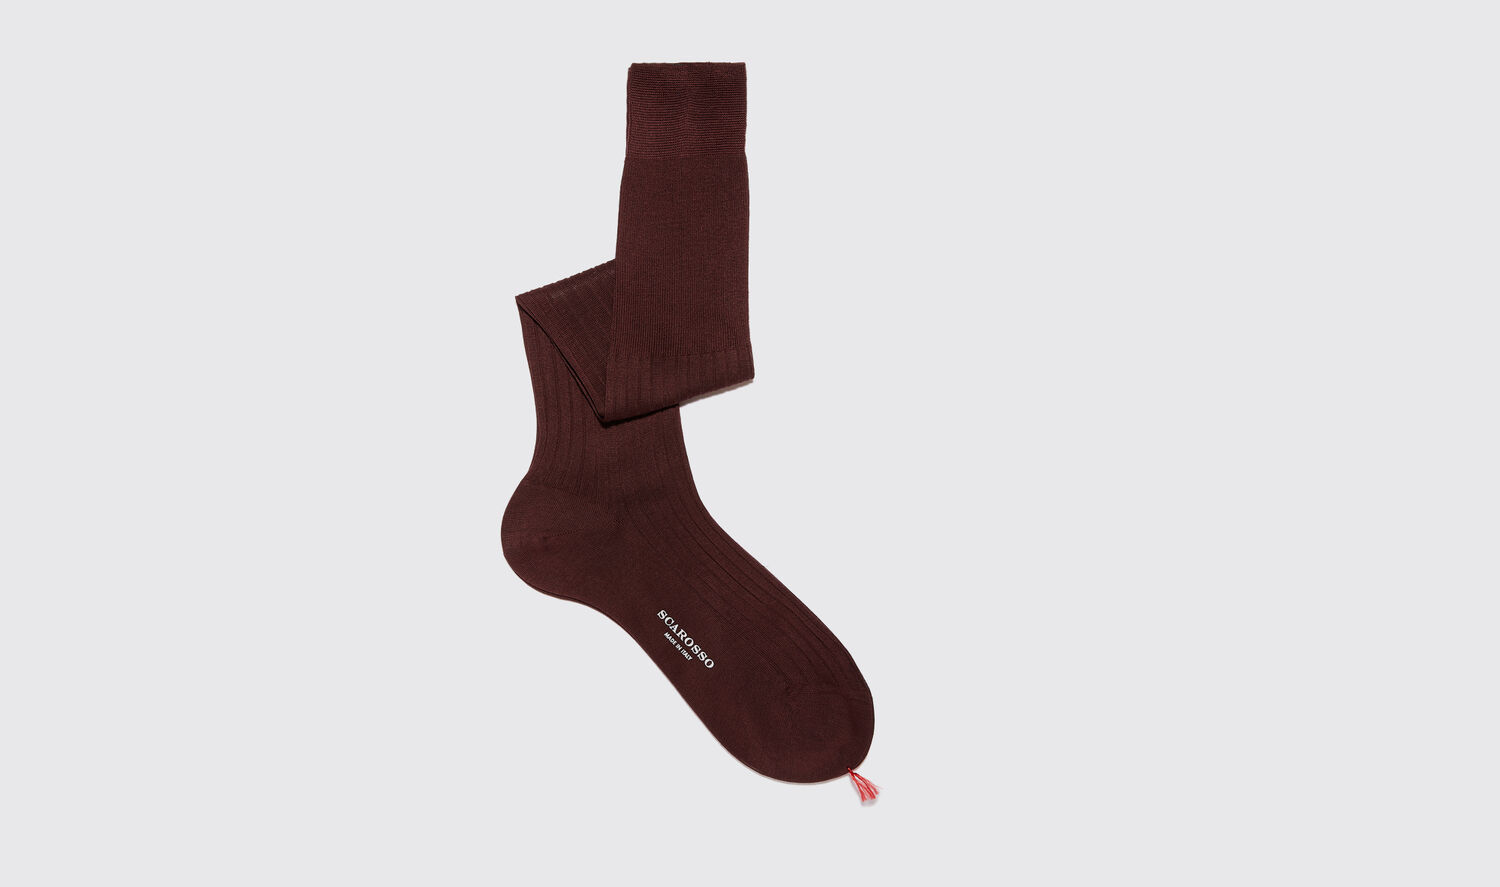 Scarosso Before They Go Burgundy Cotton Knee Socks Cotton In Burgundy - Cotton